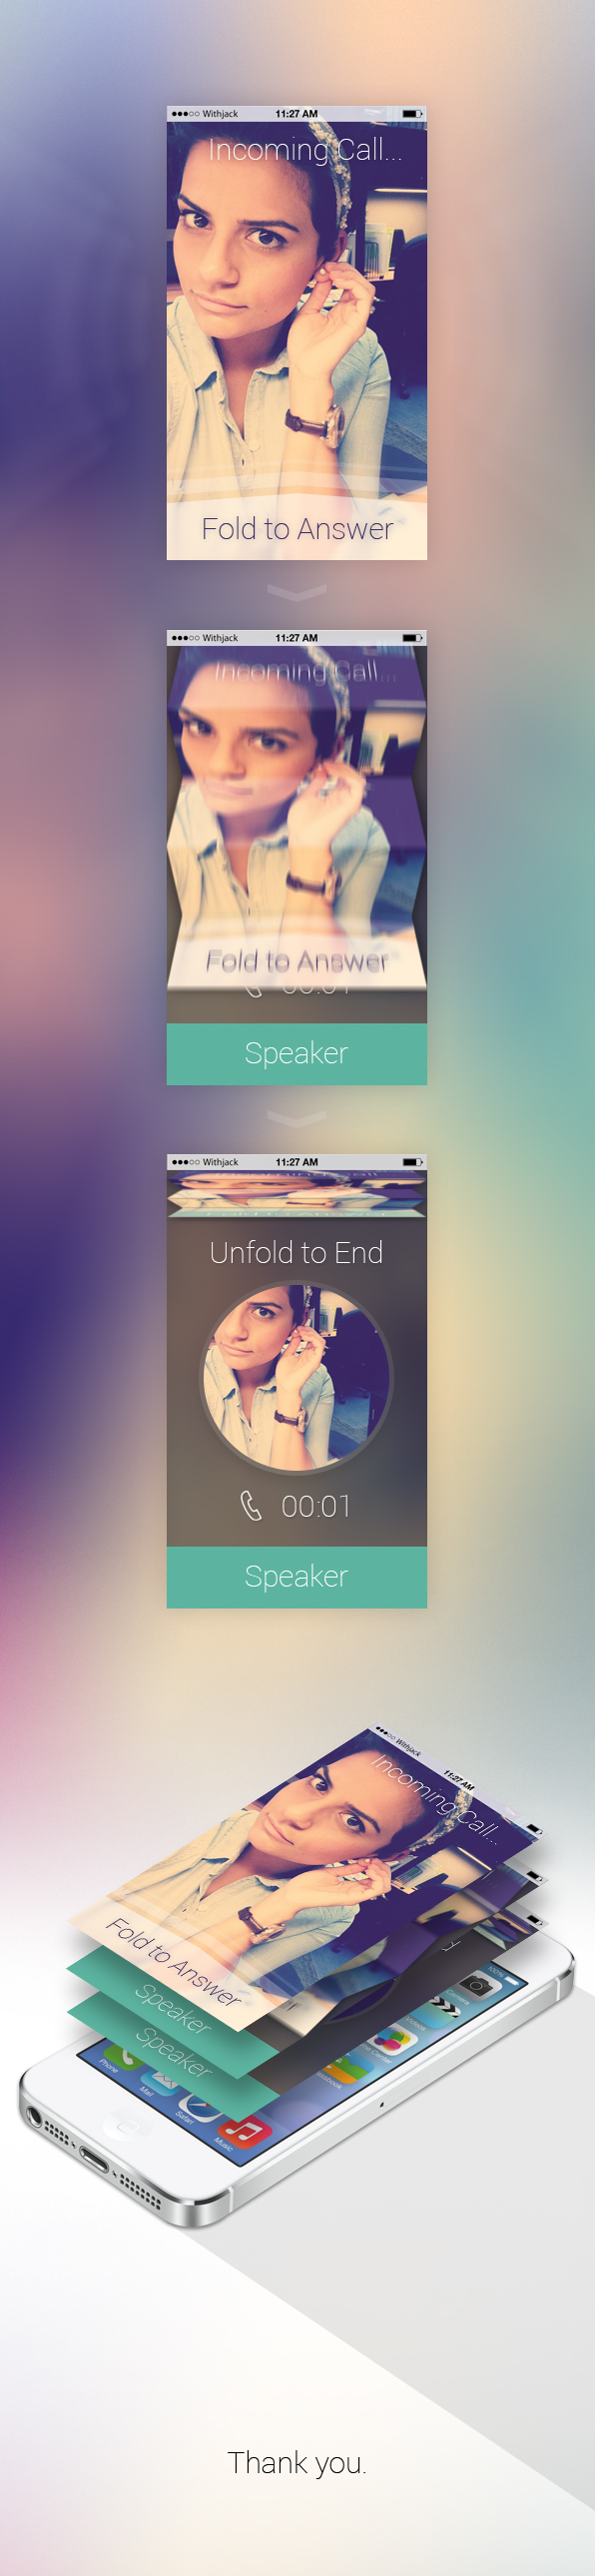 UI ux user interface user experience long shadow iphone 5 ios7 fold folding ui folding design phone call clean thin font blurry background  dimensional